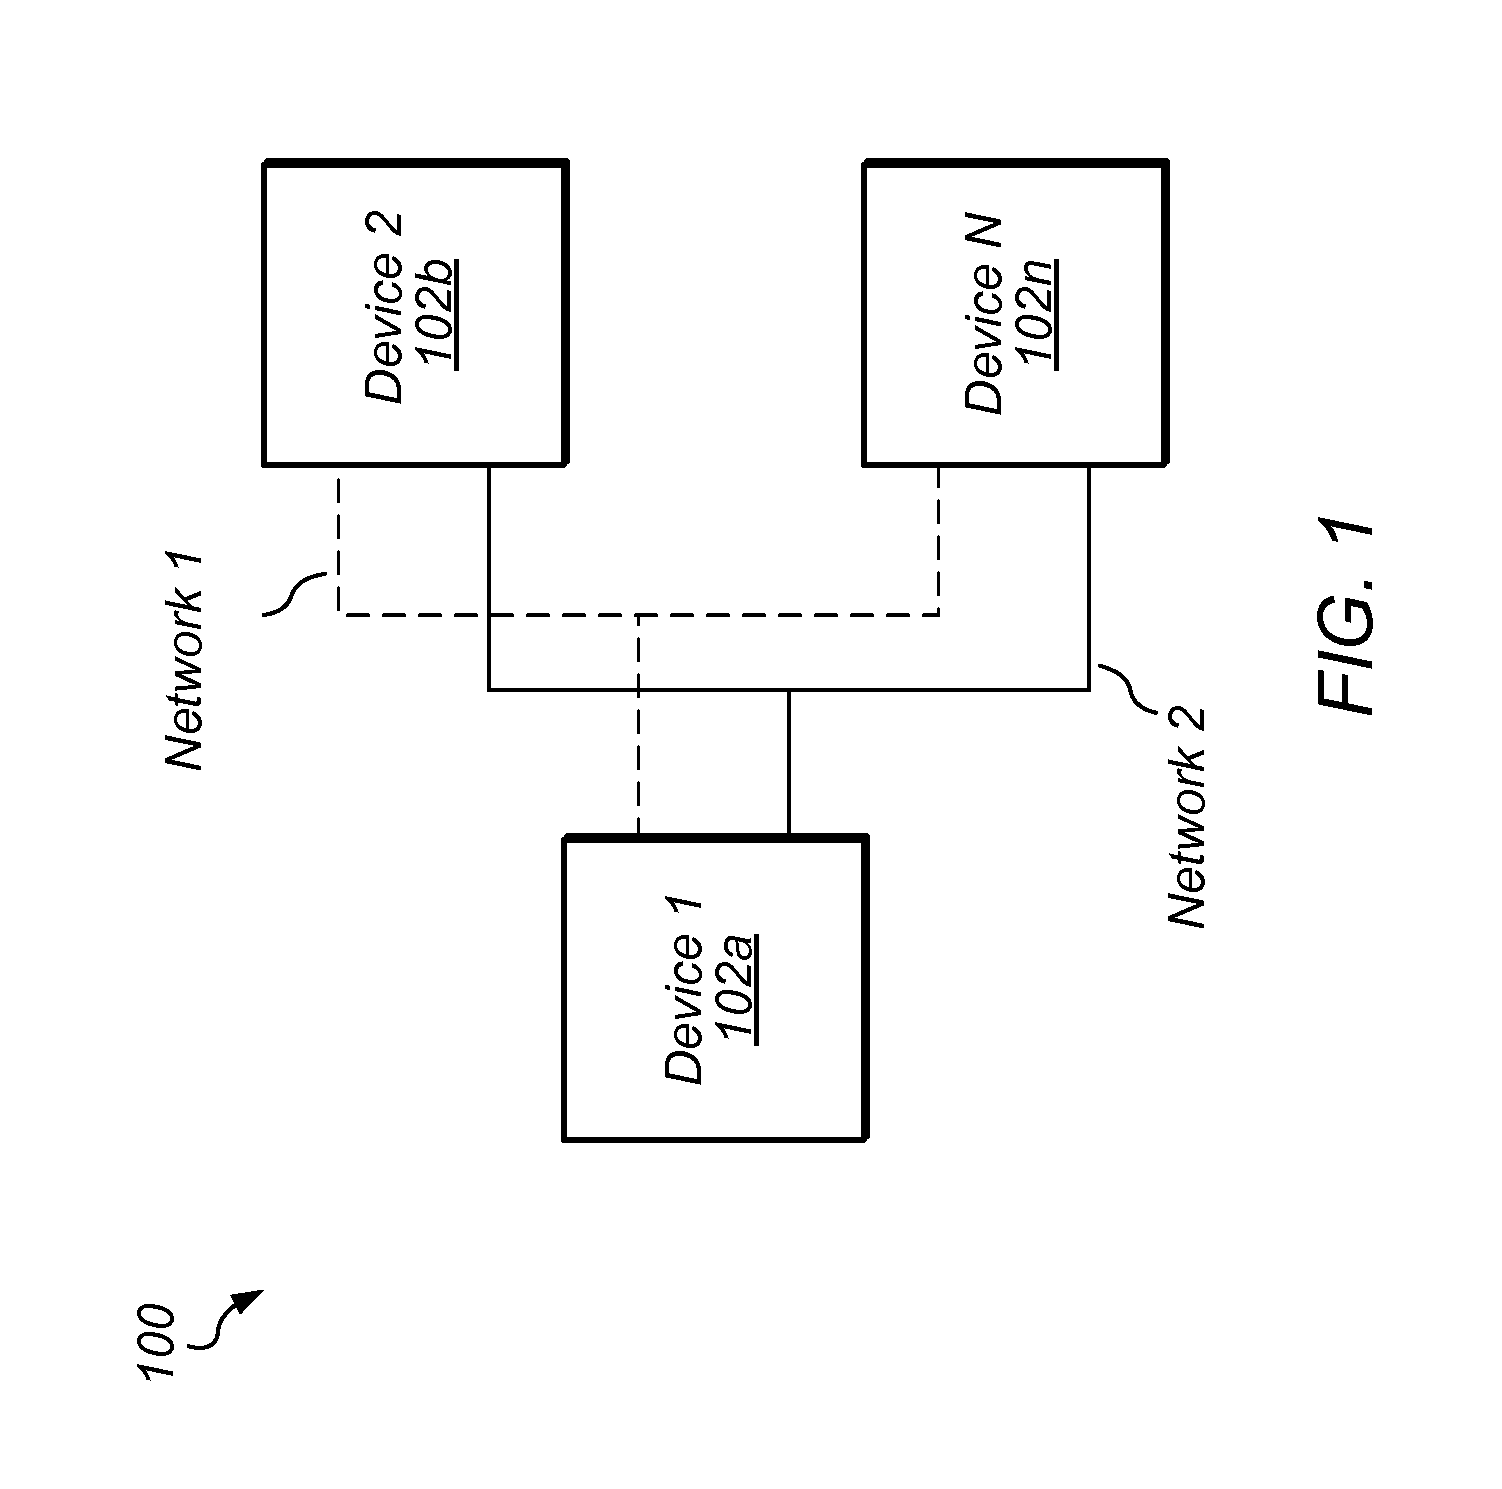 Packet-Based Aggregation of Data Streams Across Disparate Networking Interfaces While Providing Robust Reaction to Dynamic Network Interference With Path Selection and Load Balancing